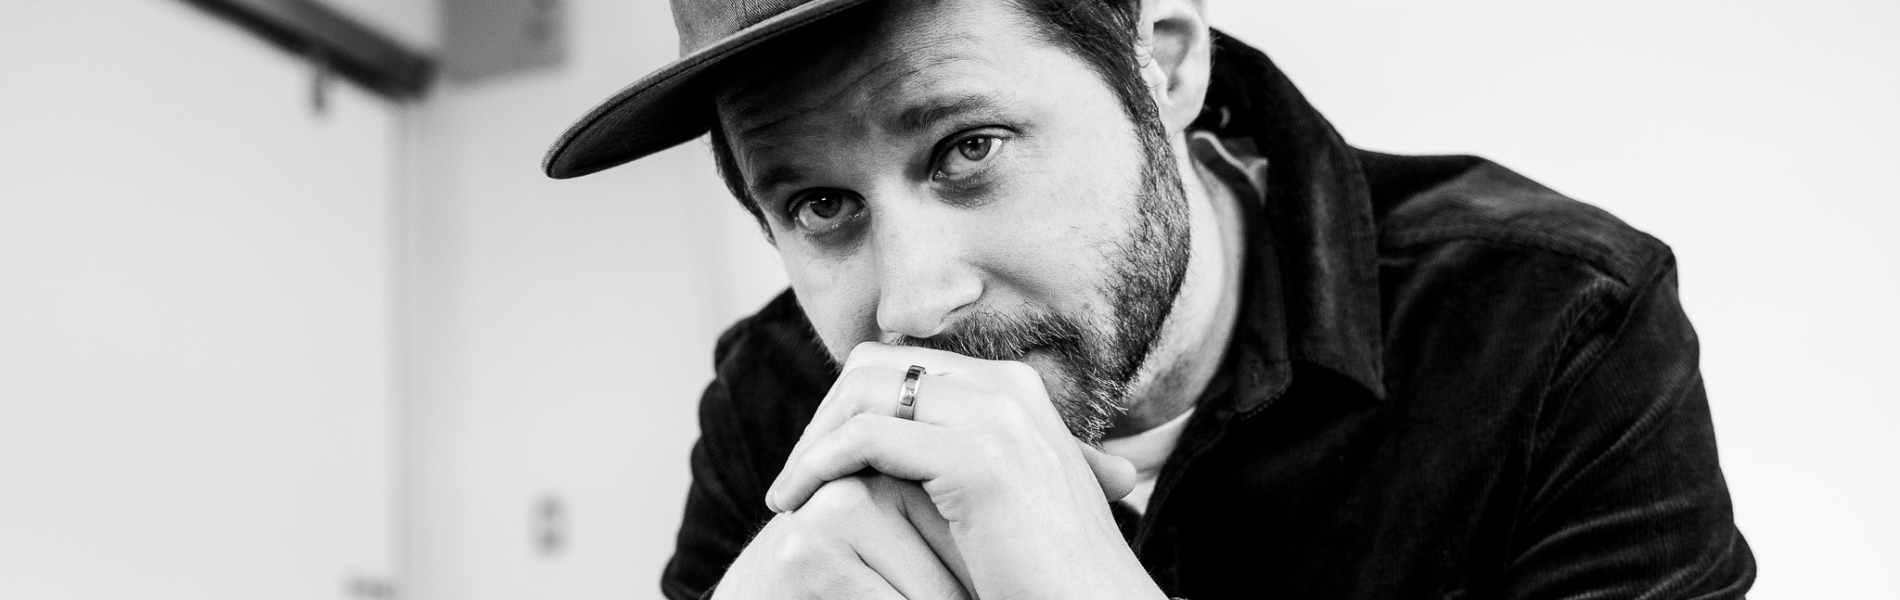 Black & white image closely cropped of Dan Mangan with his hands in front of his chin